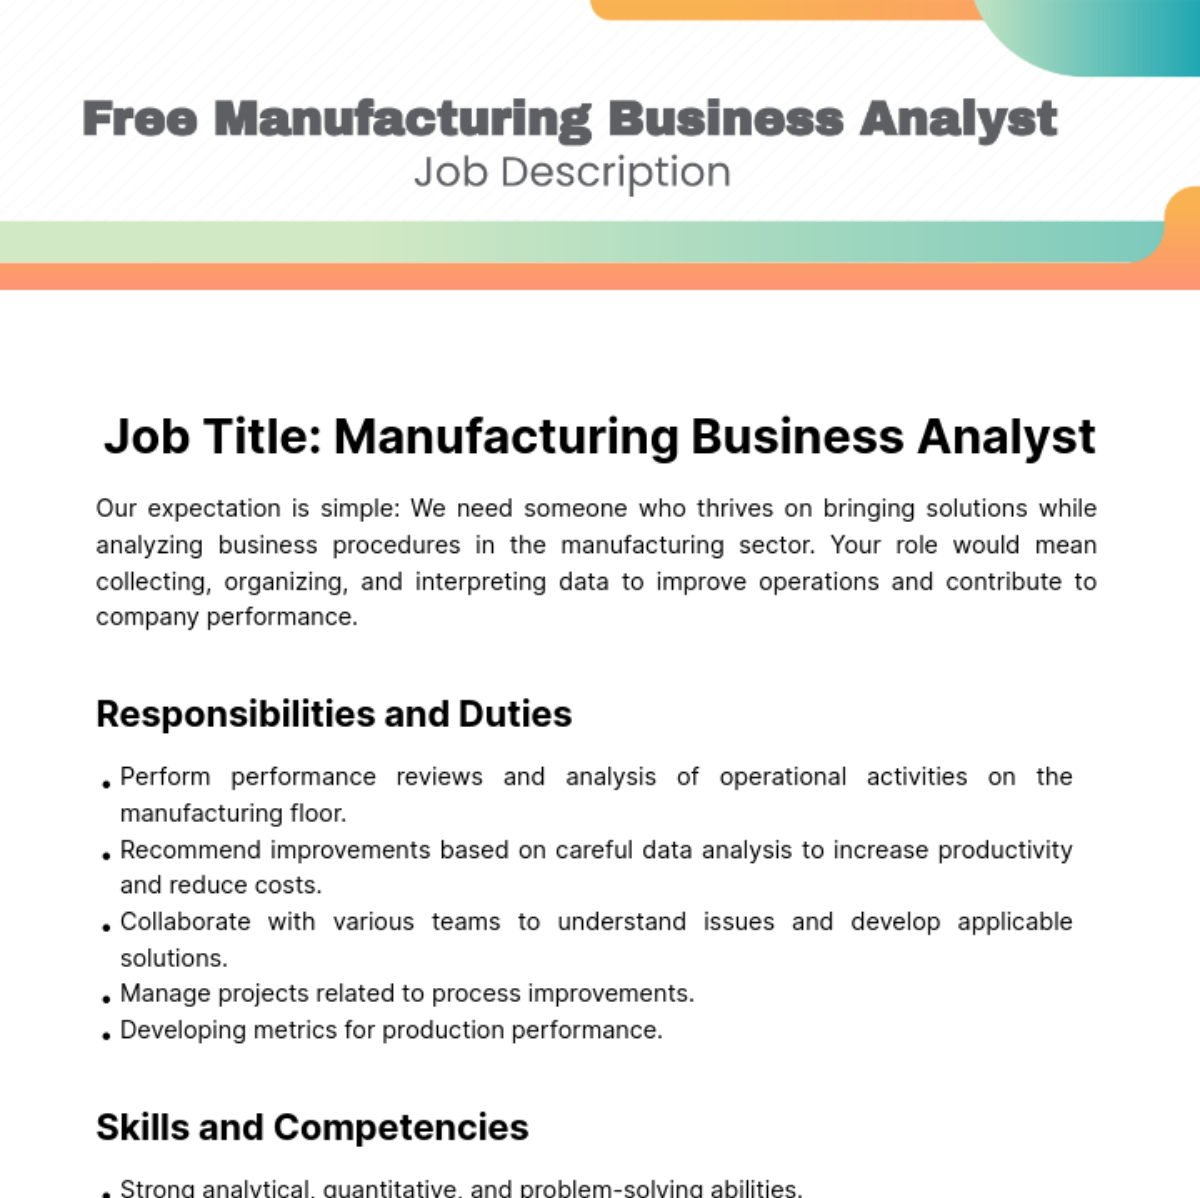 Free Manufacturing Business Analyst Job Description Template